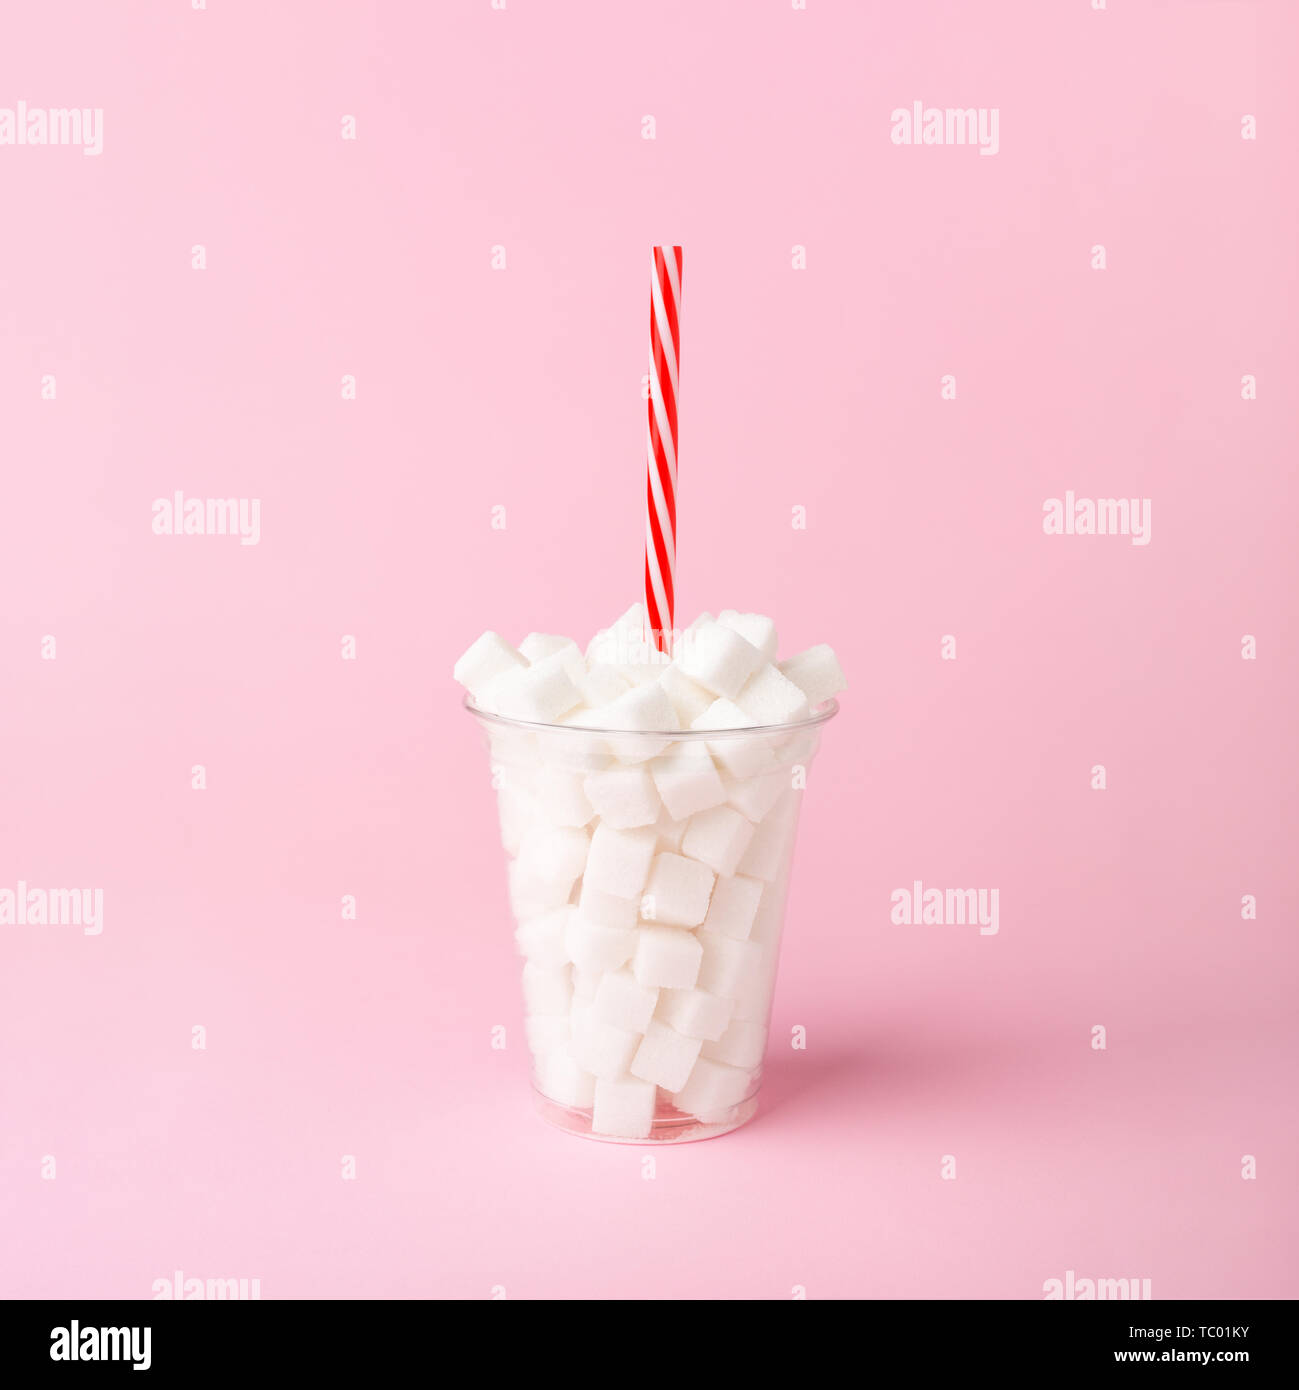 Plastic cup with straw full of sugar cubes on pastel pink background. Unhealthy food concept. Minimal, vertical, side view. Stock Photo